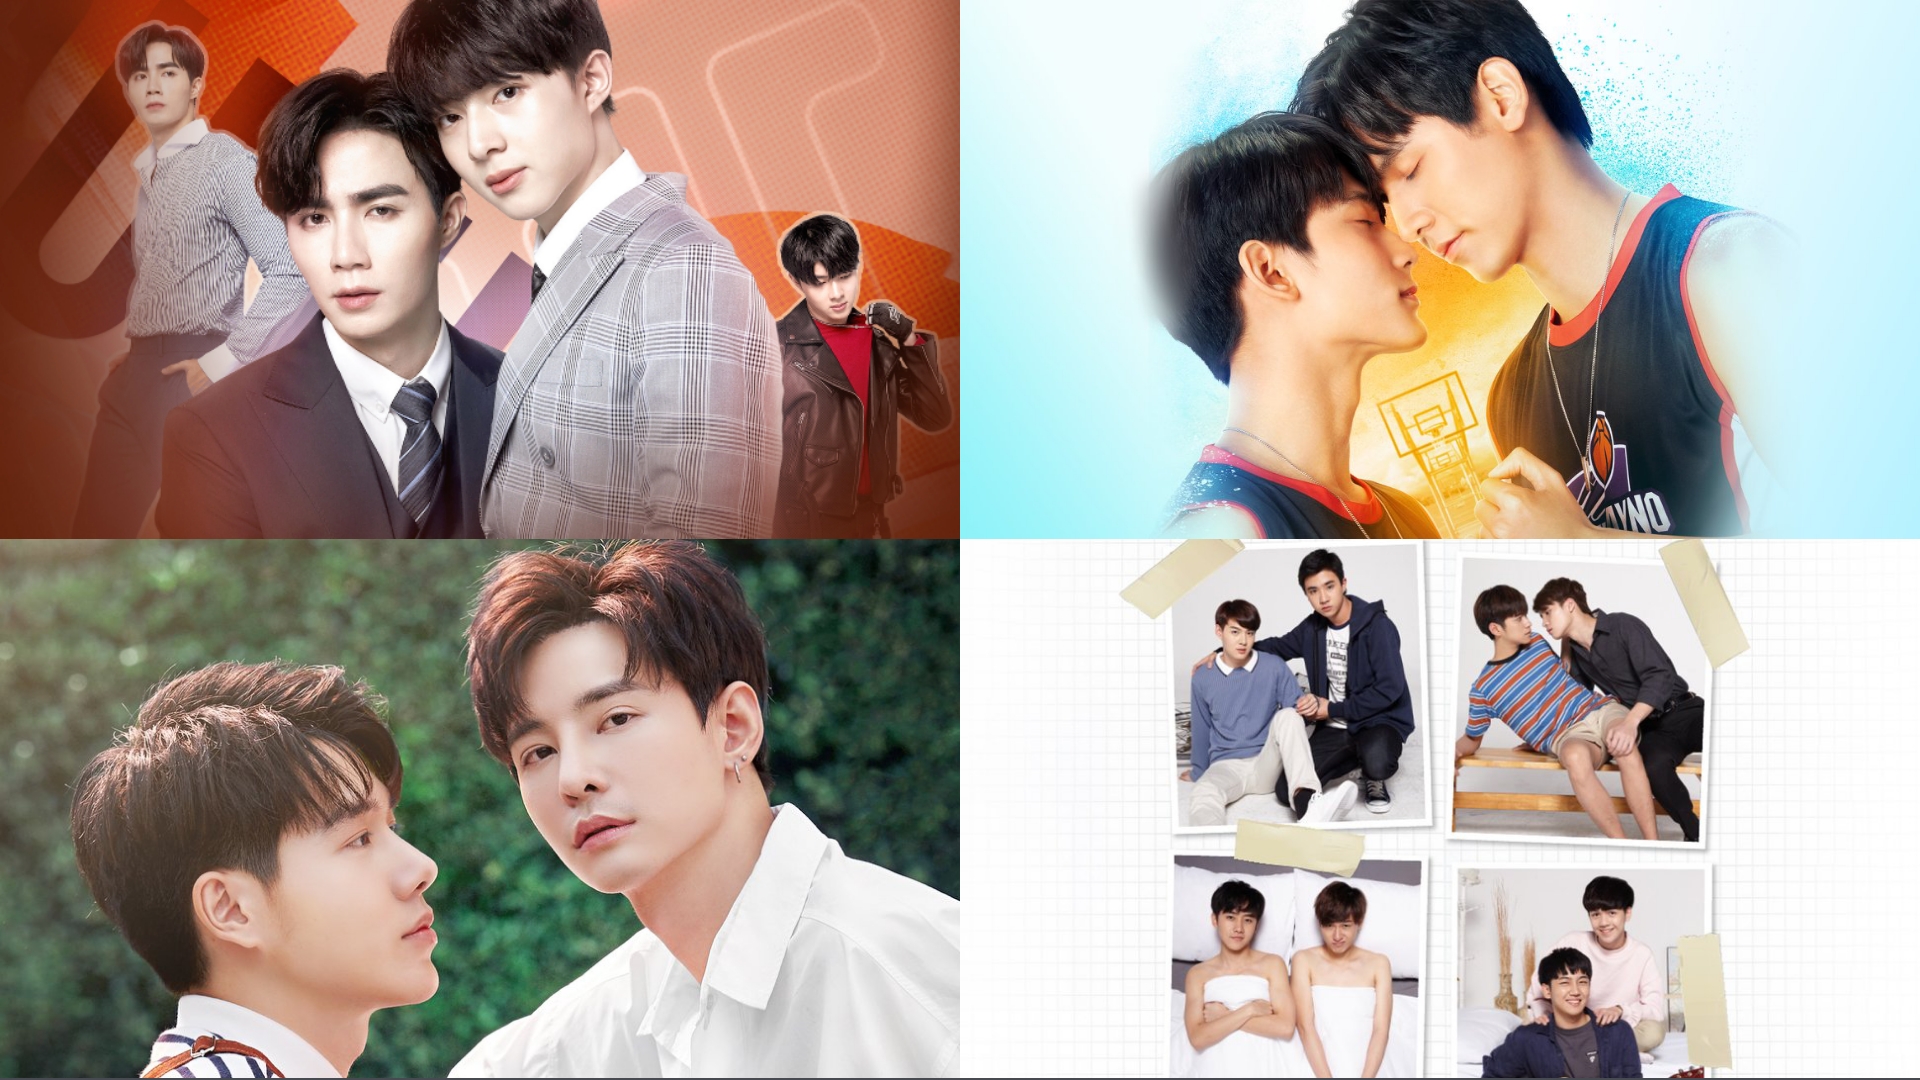 The Top 10 Thai BL Dramas With The Highest Ratings On VIKI - int.cafebl.com